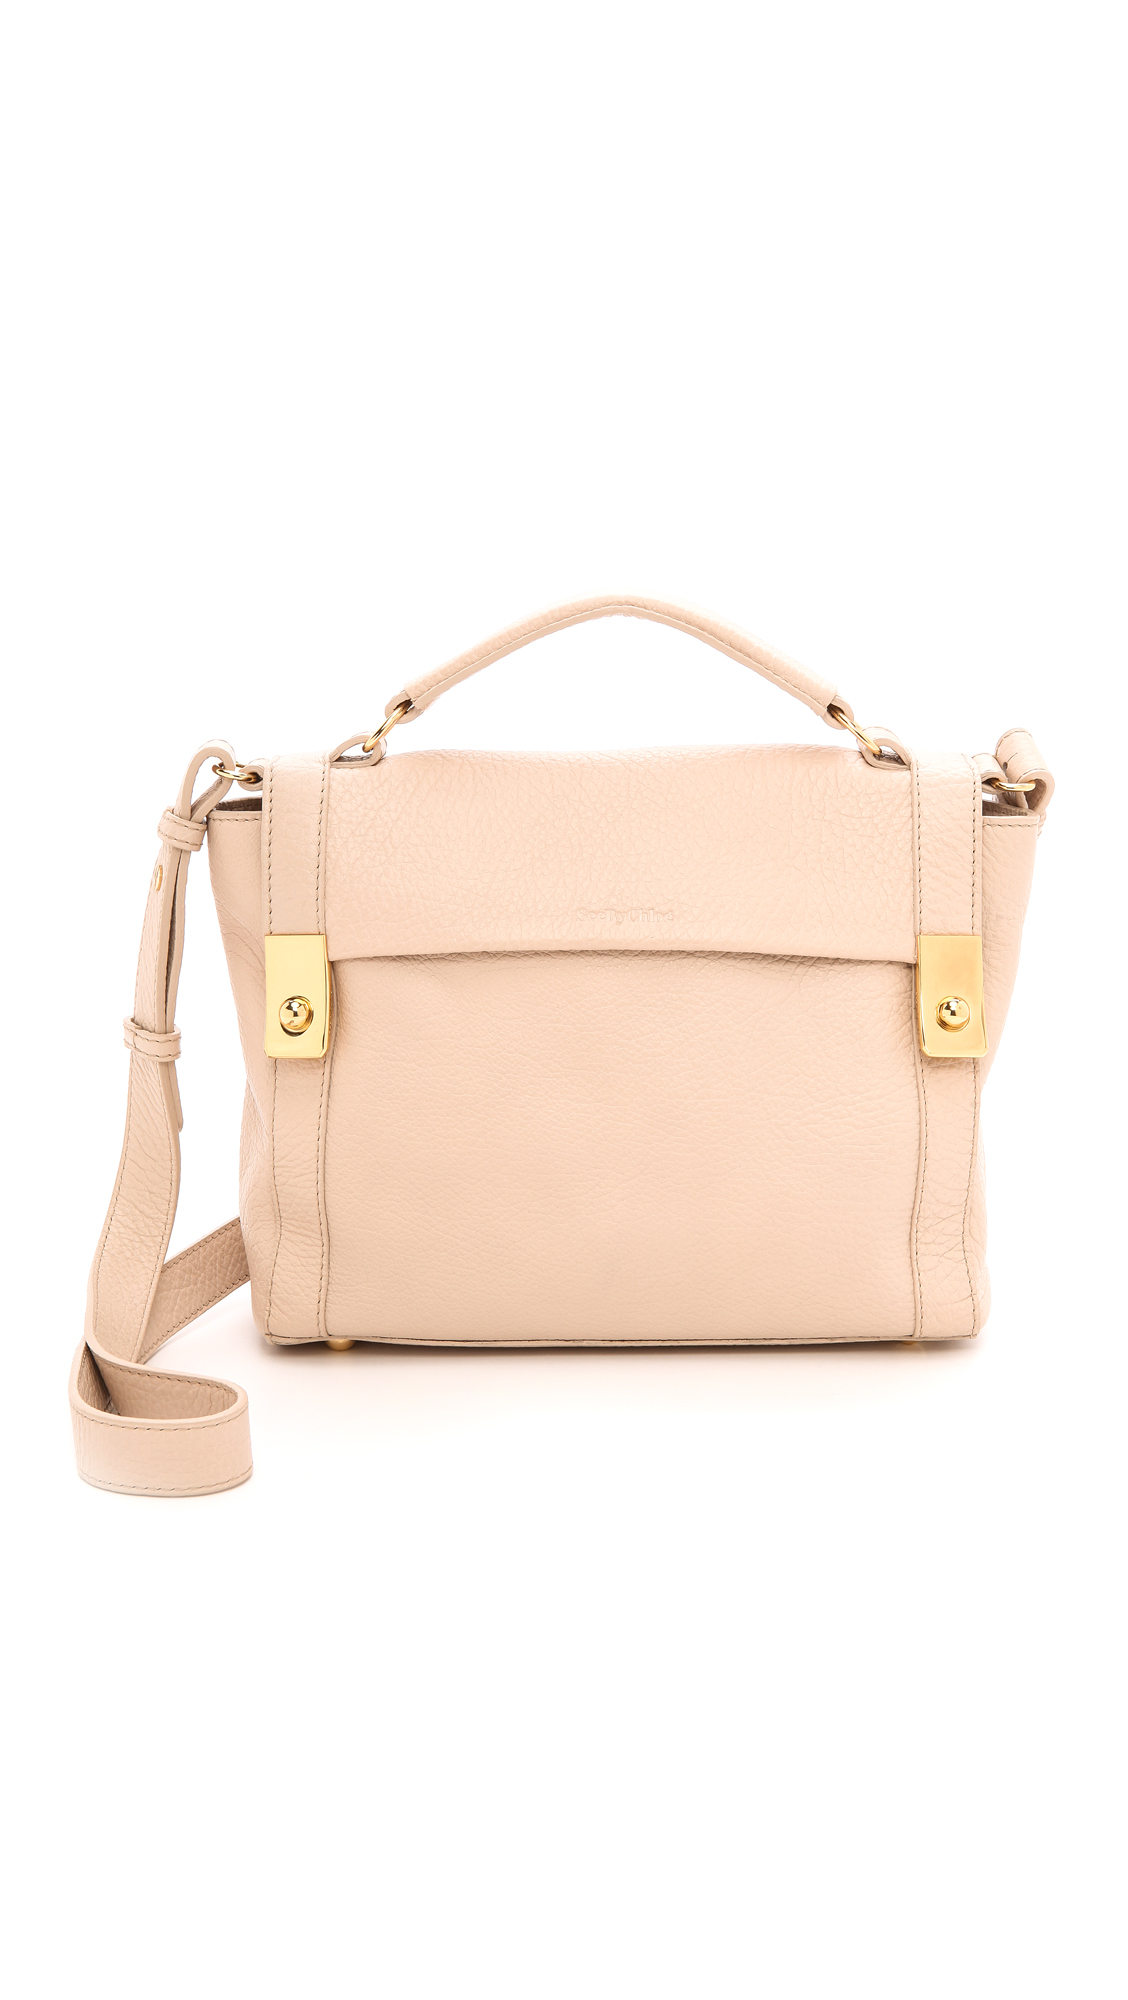 See By Chloé Jill Medium Satchel With Cross Body Strap - Beluga in Pink ...